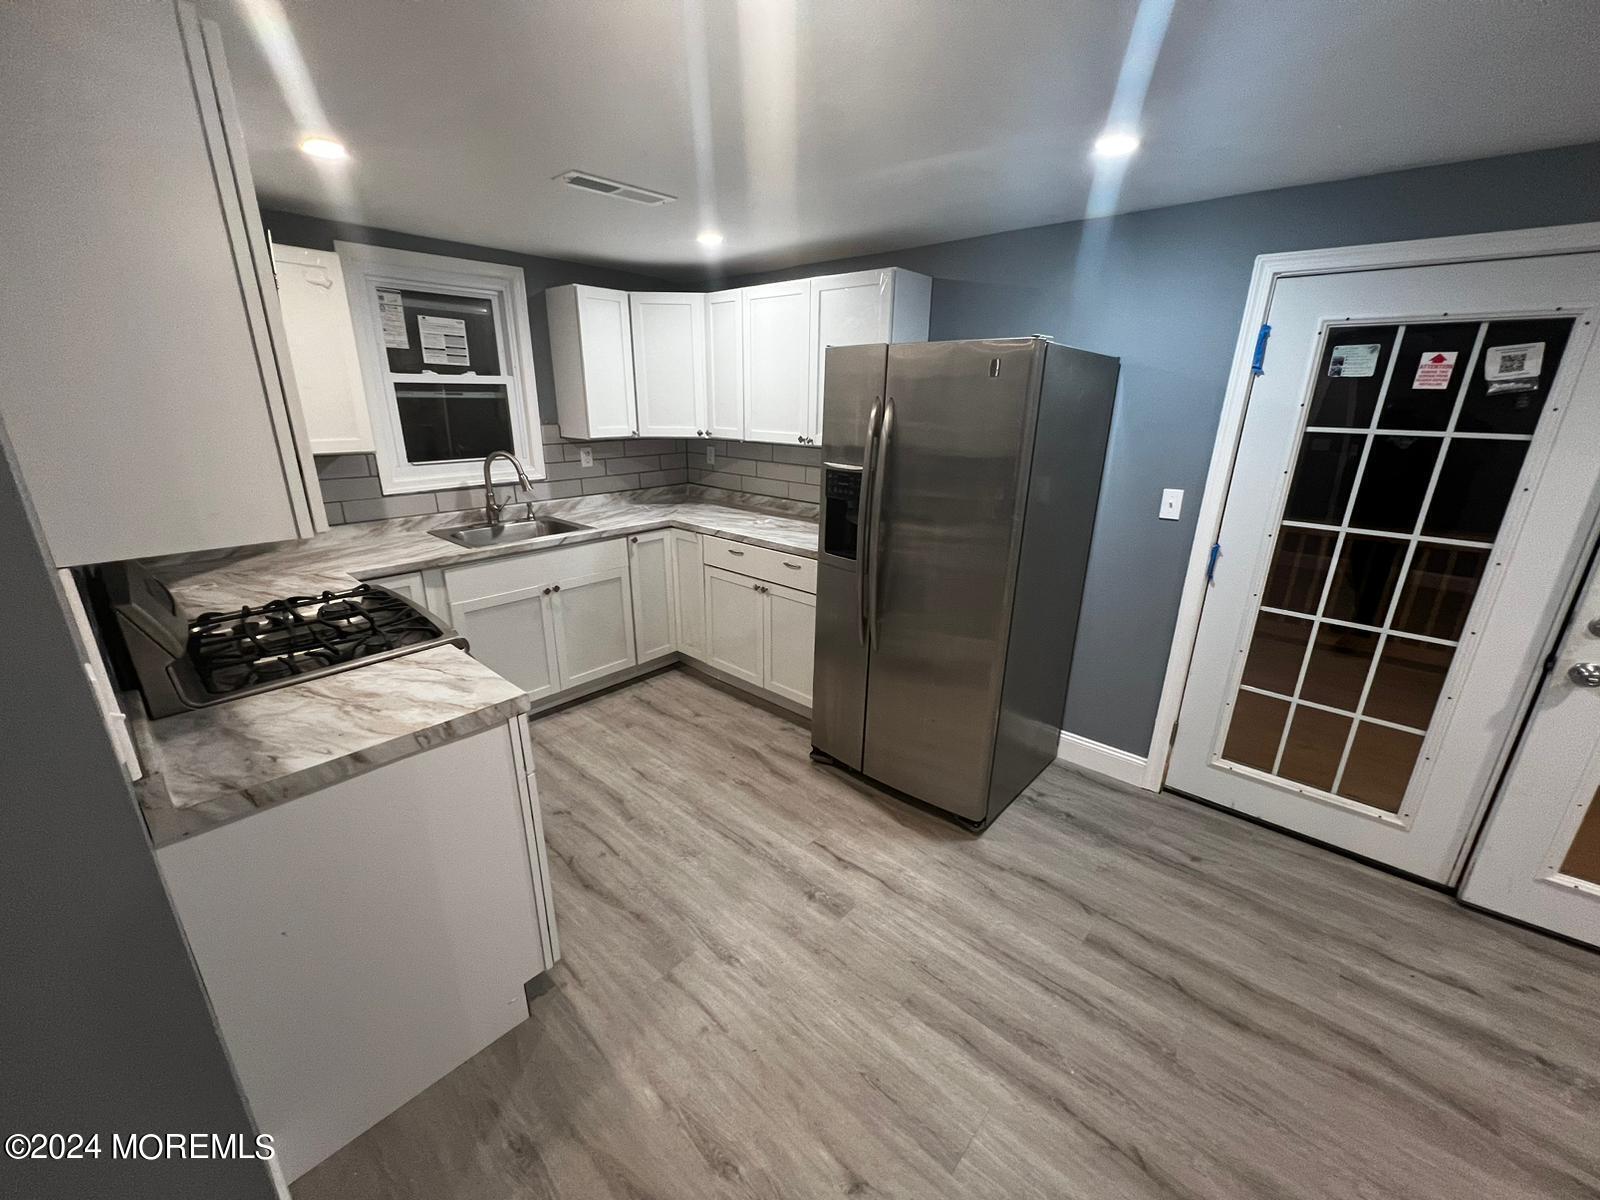 a kitchen with stainless steel appliances a refrigerator and wooden cabinets